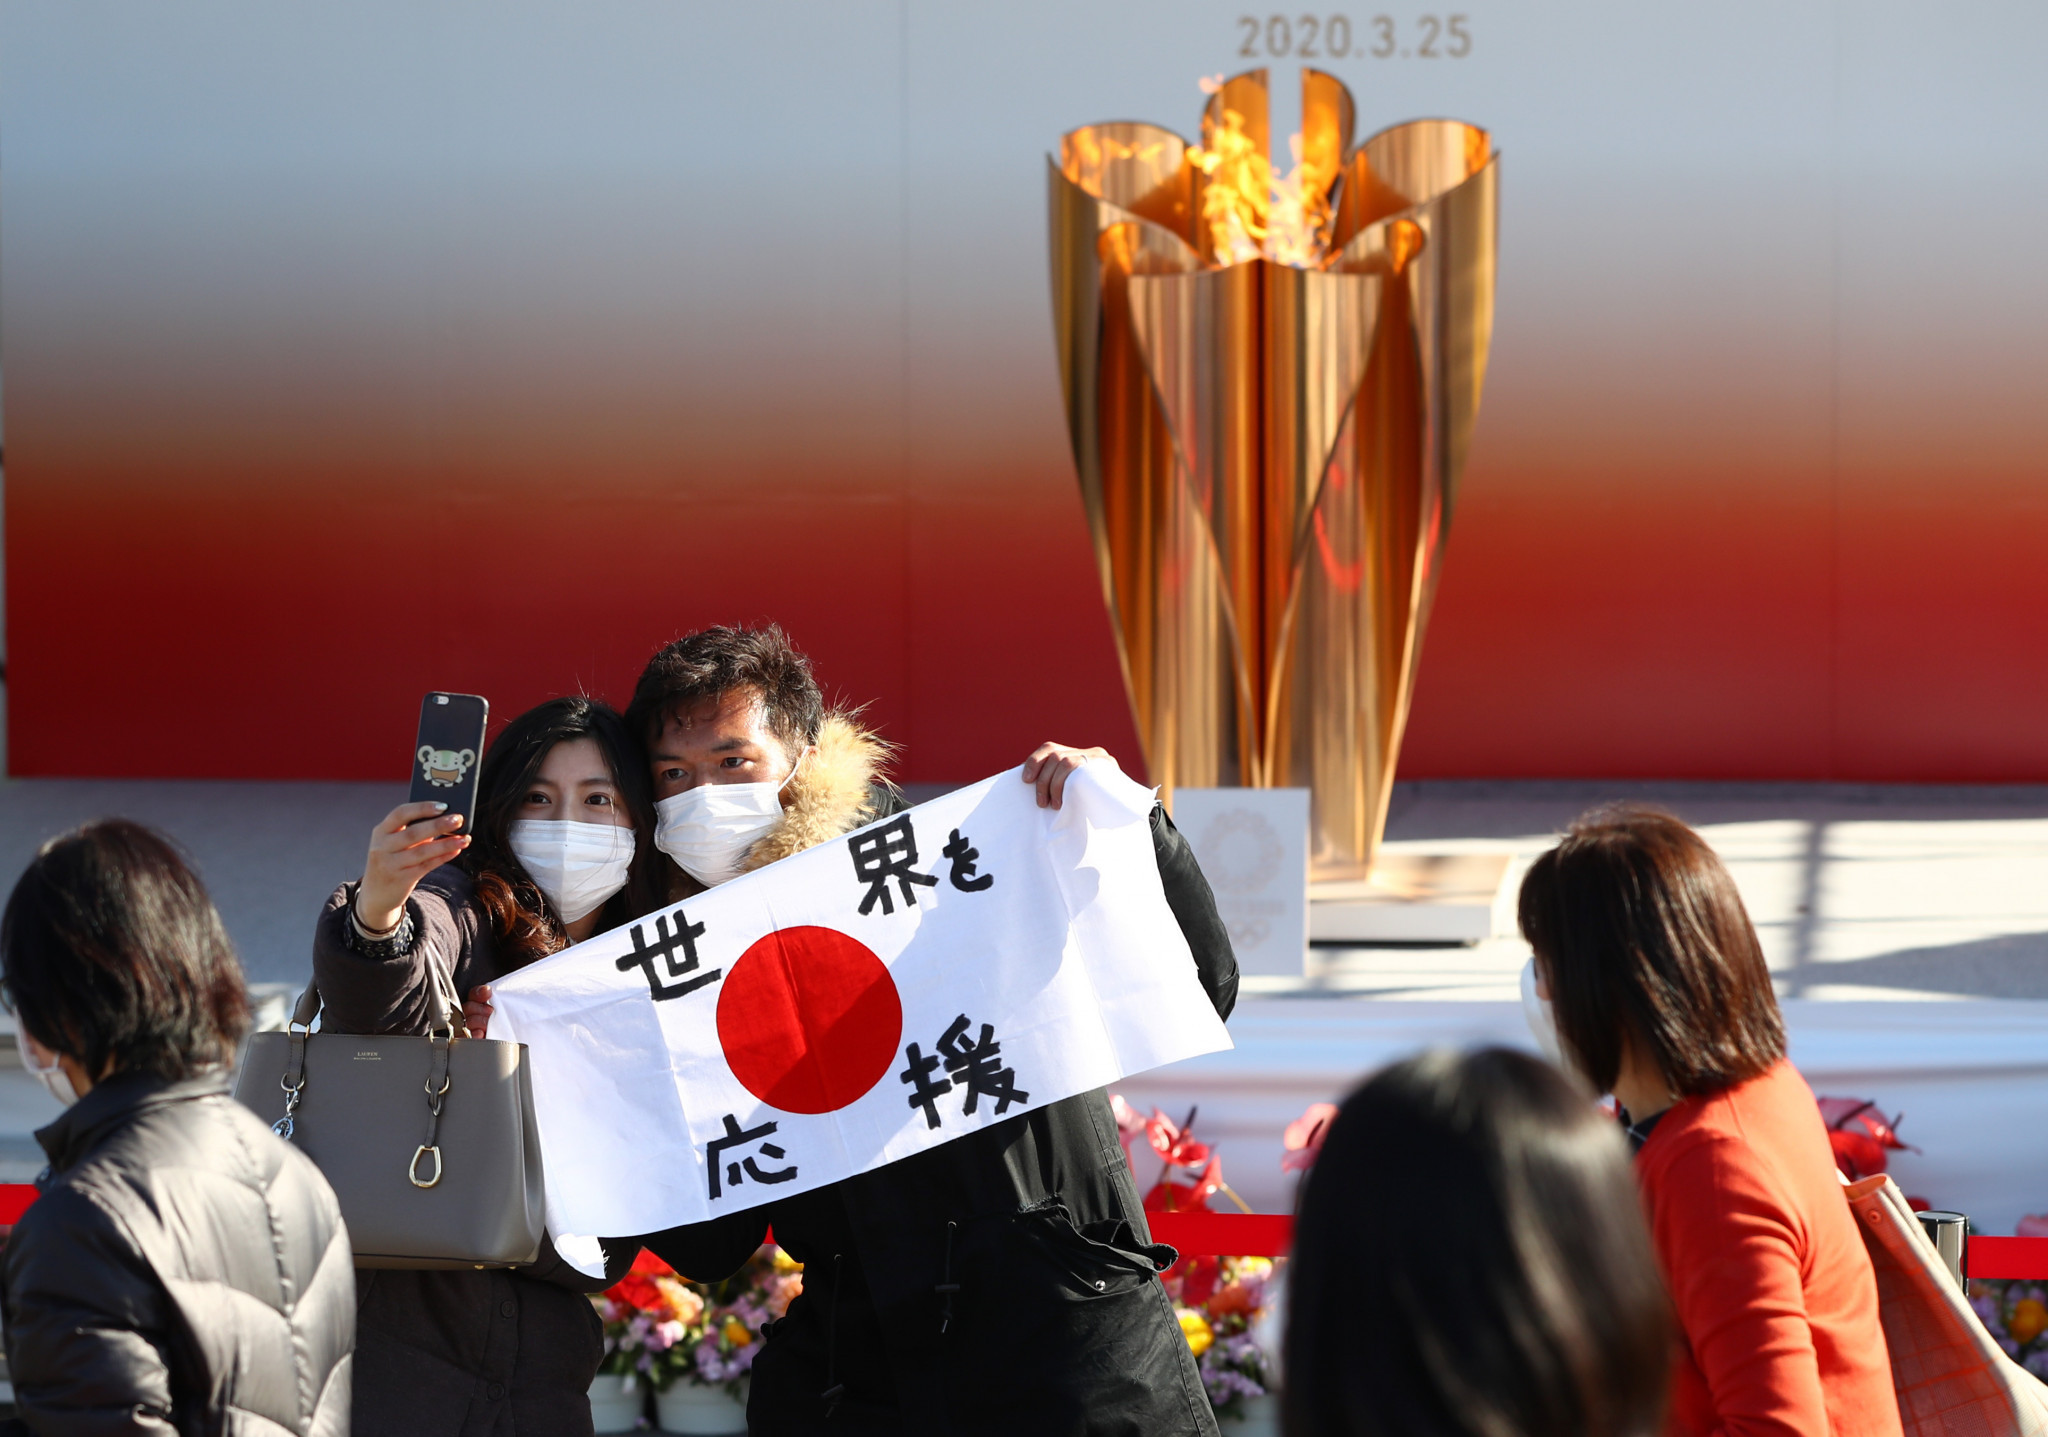 The Olympic Flame proved popular after arriving in Japan earlier this year ©Getty Images